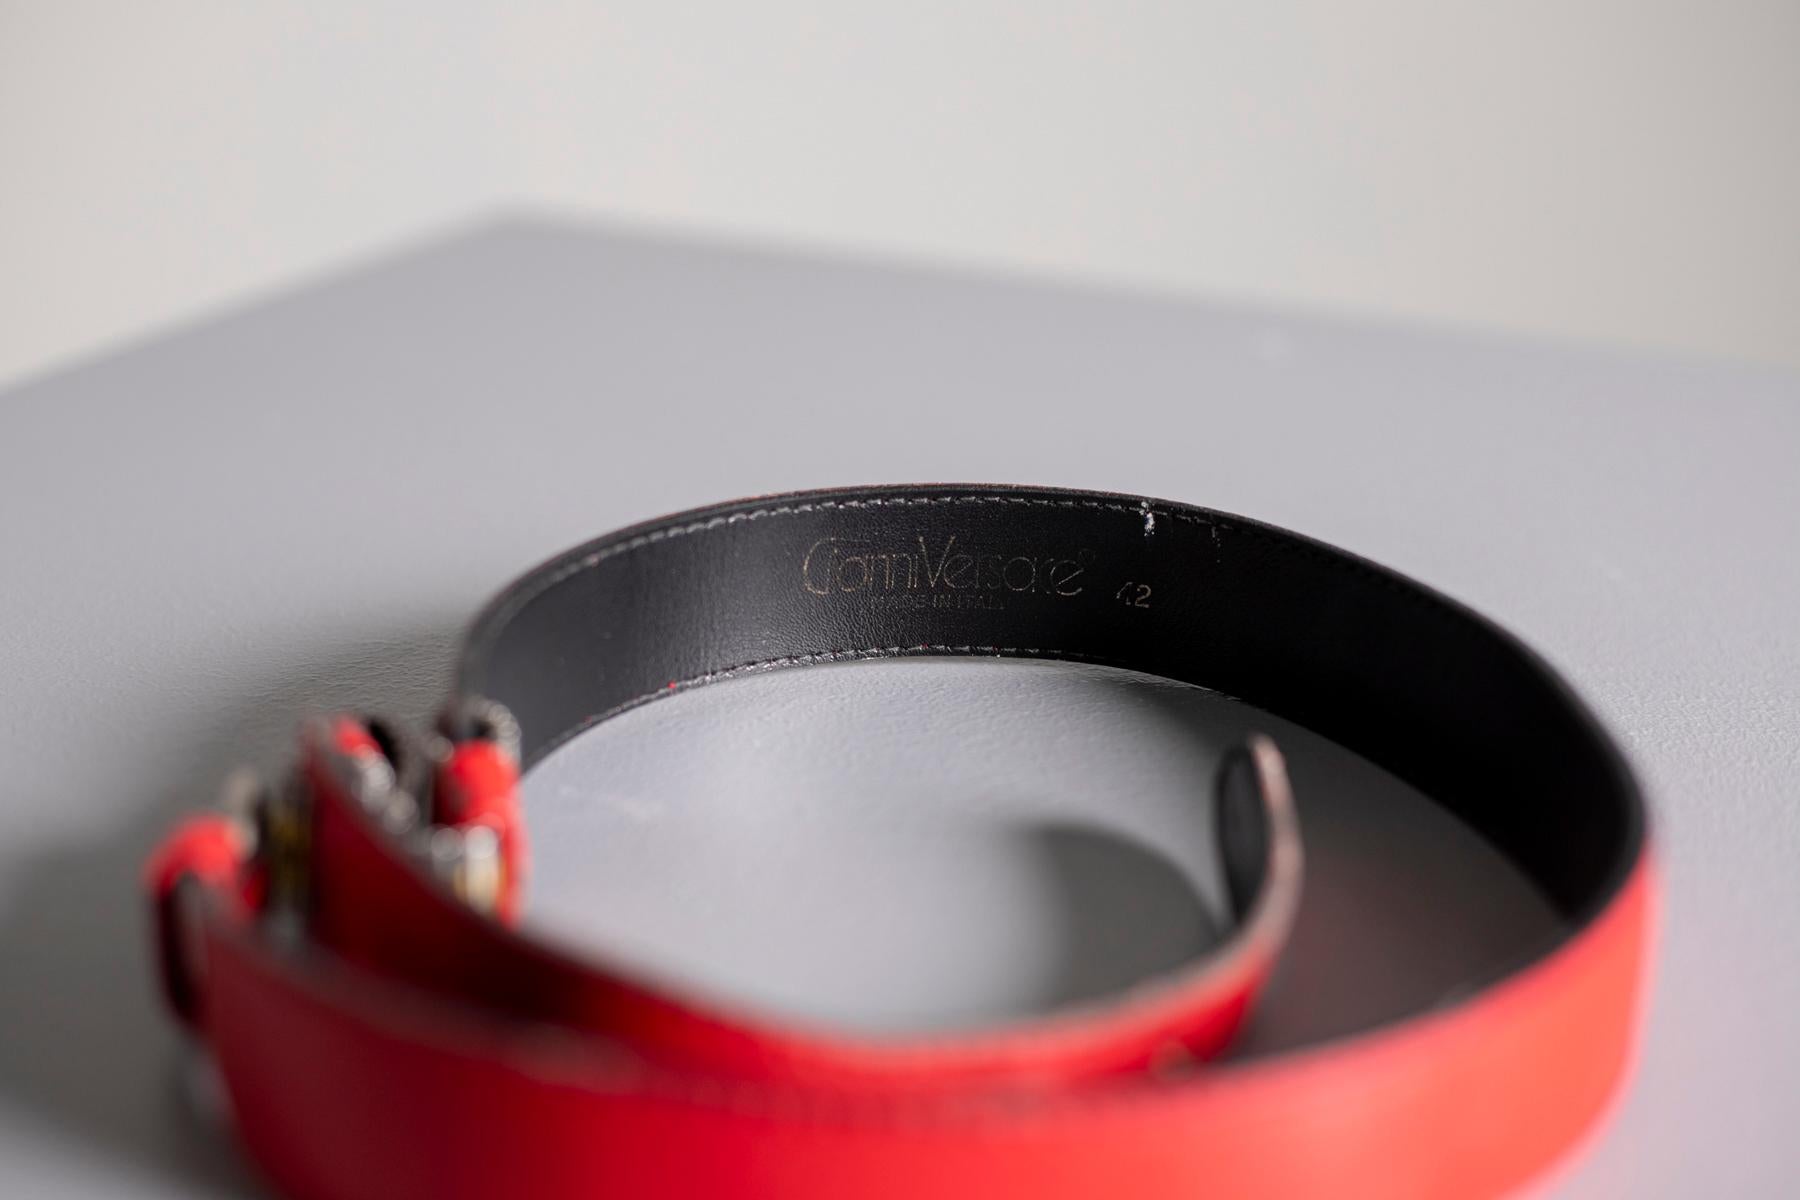 Beautiful red leather belt by Gianni Versace, Made in Italy. Really special piece to make your outfit more sophisticated. The belt is made of a soft leather and has details on the left side in gold and silver metal. Inside we find the Gianni Versace